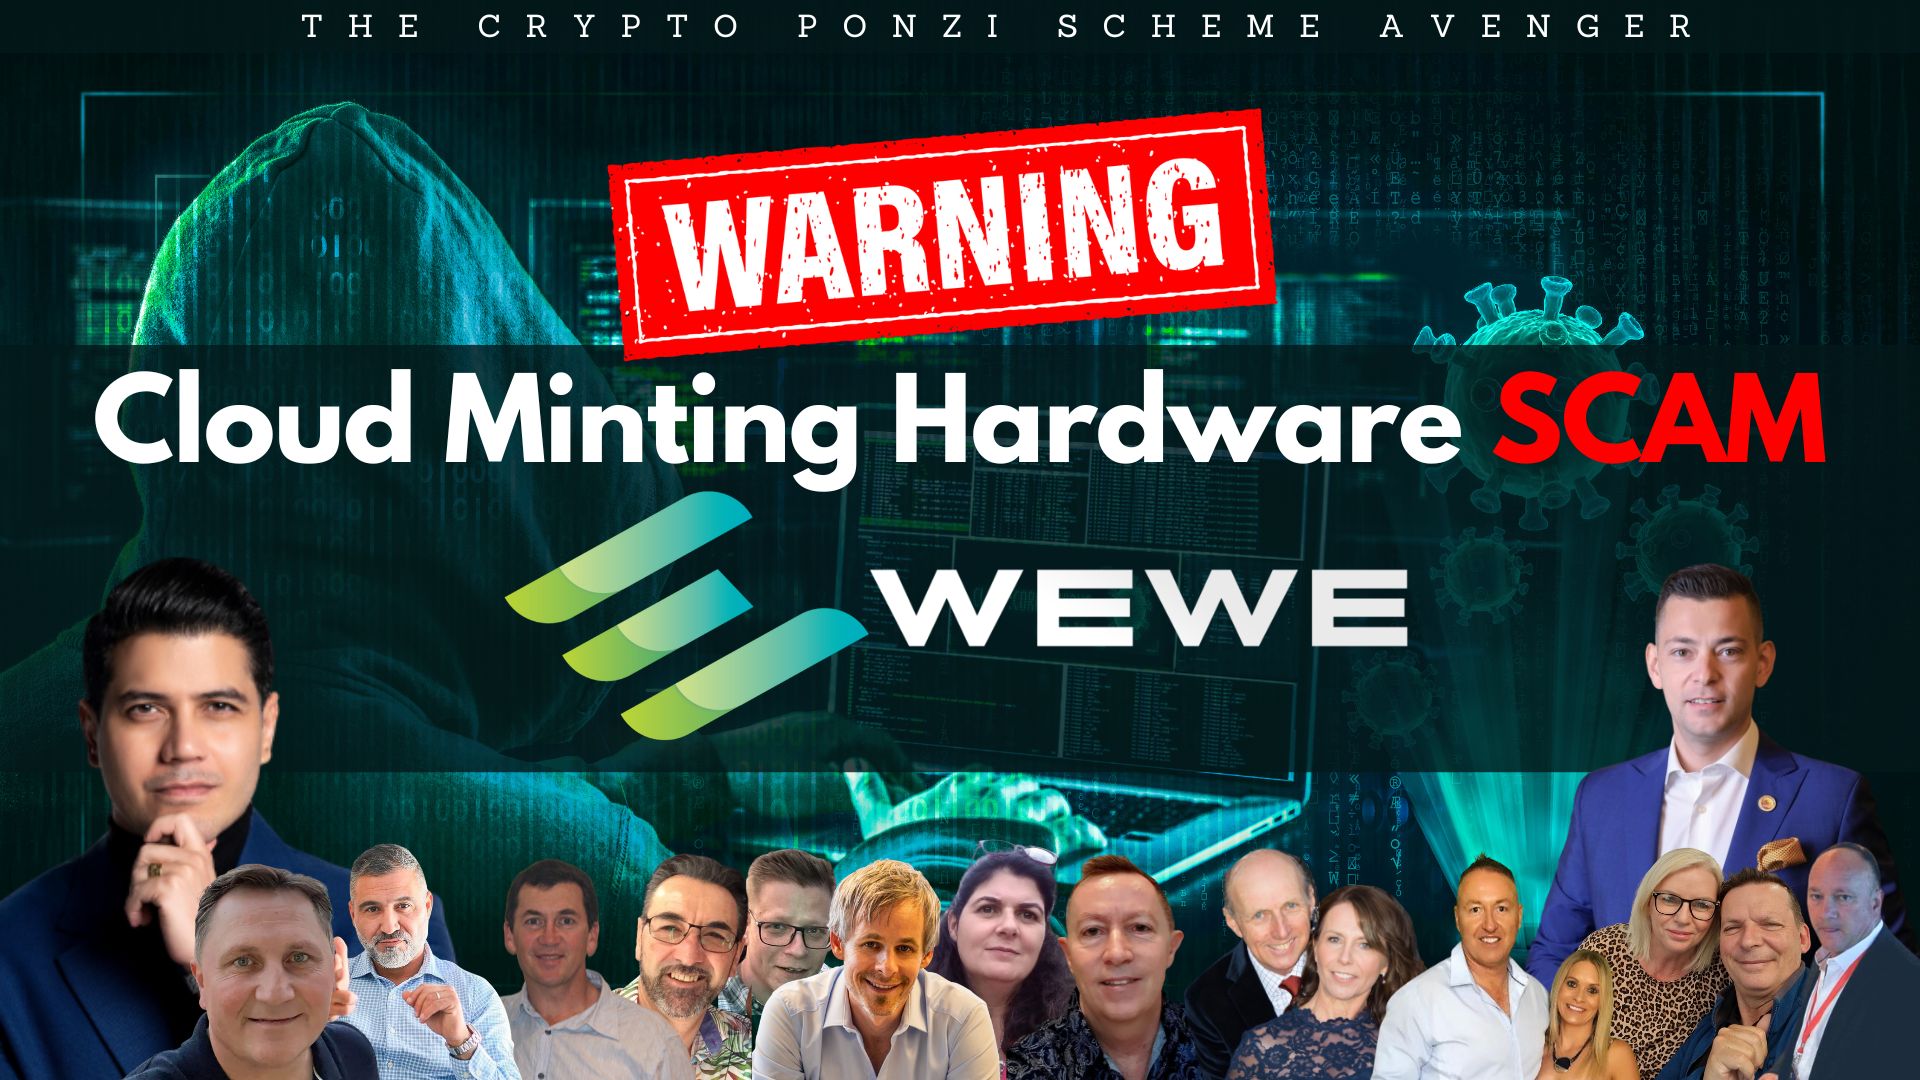 WEWE Global Cloud Minting Scam: Beware of Suspicious Emails and the Dangerous Affiliates Behind Them